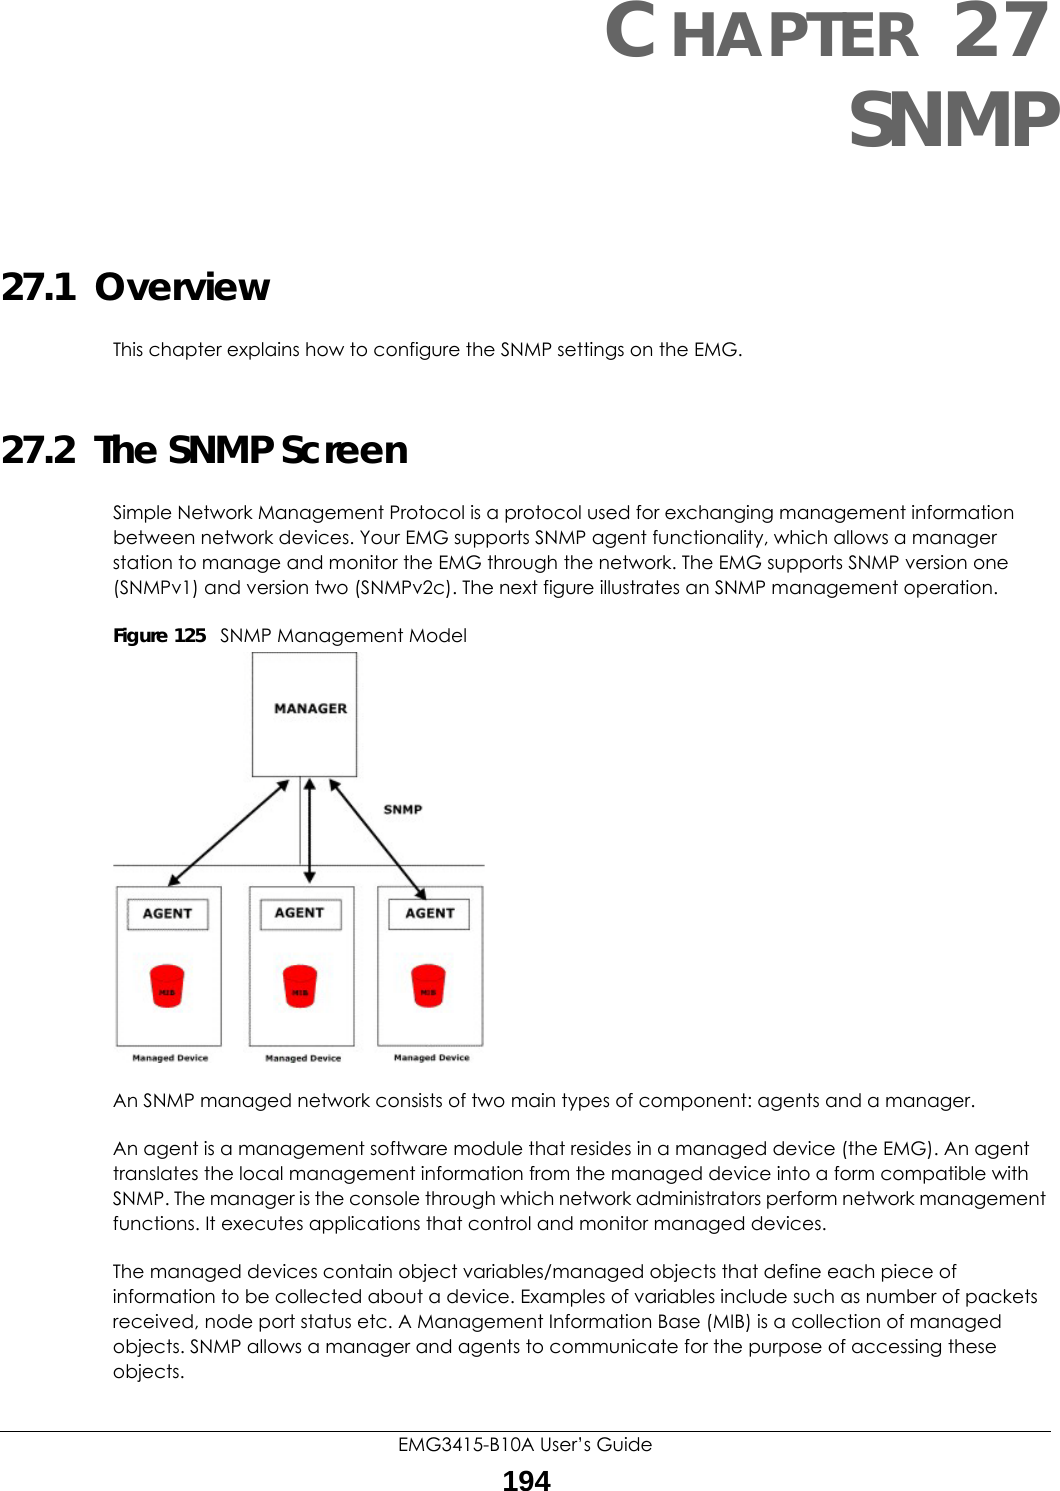 EMG3415-B10A User’s Guide194CHAPTER 27SNMP27.1  OverviewThis chapter explains how to configure the SNMP settings on the EMG.27.2  The SNMP ScreenSimple Network Management Protocol is a protocol used for exchanging management information between network devices. Your EMG supports SNMP agent functionality, which allows a manager station to manage and monitor the EMG through the network. The EMG supports SNMP version one (SNMPv1) and version two (SNMPv2c). The next figure illustrates an SNMP management operation.Figure 125   SNMP Management ModelAn SNMP managed network consists of two main types of component: agents and a manager. An agent is a management software module that resides in a managed device (the EMG). An agent translates the local management information from the managed device into a form compatible with SNMP. The manager is the console through which network administrators perform network management functions. It executes applications that control and monitor managed devices. The managed devices contain object variables/managed objects that define each piece of information to be collected about a device. Examples of variables include such as number of packets received, node port status etc. A Management Information Base (MIB) is a collection of managed objects. SNMP allows a manager and agents to communicate for the purpose of accessing these objects.